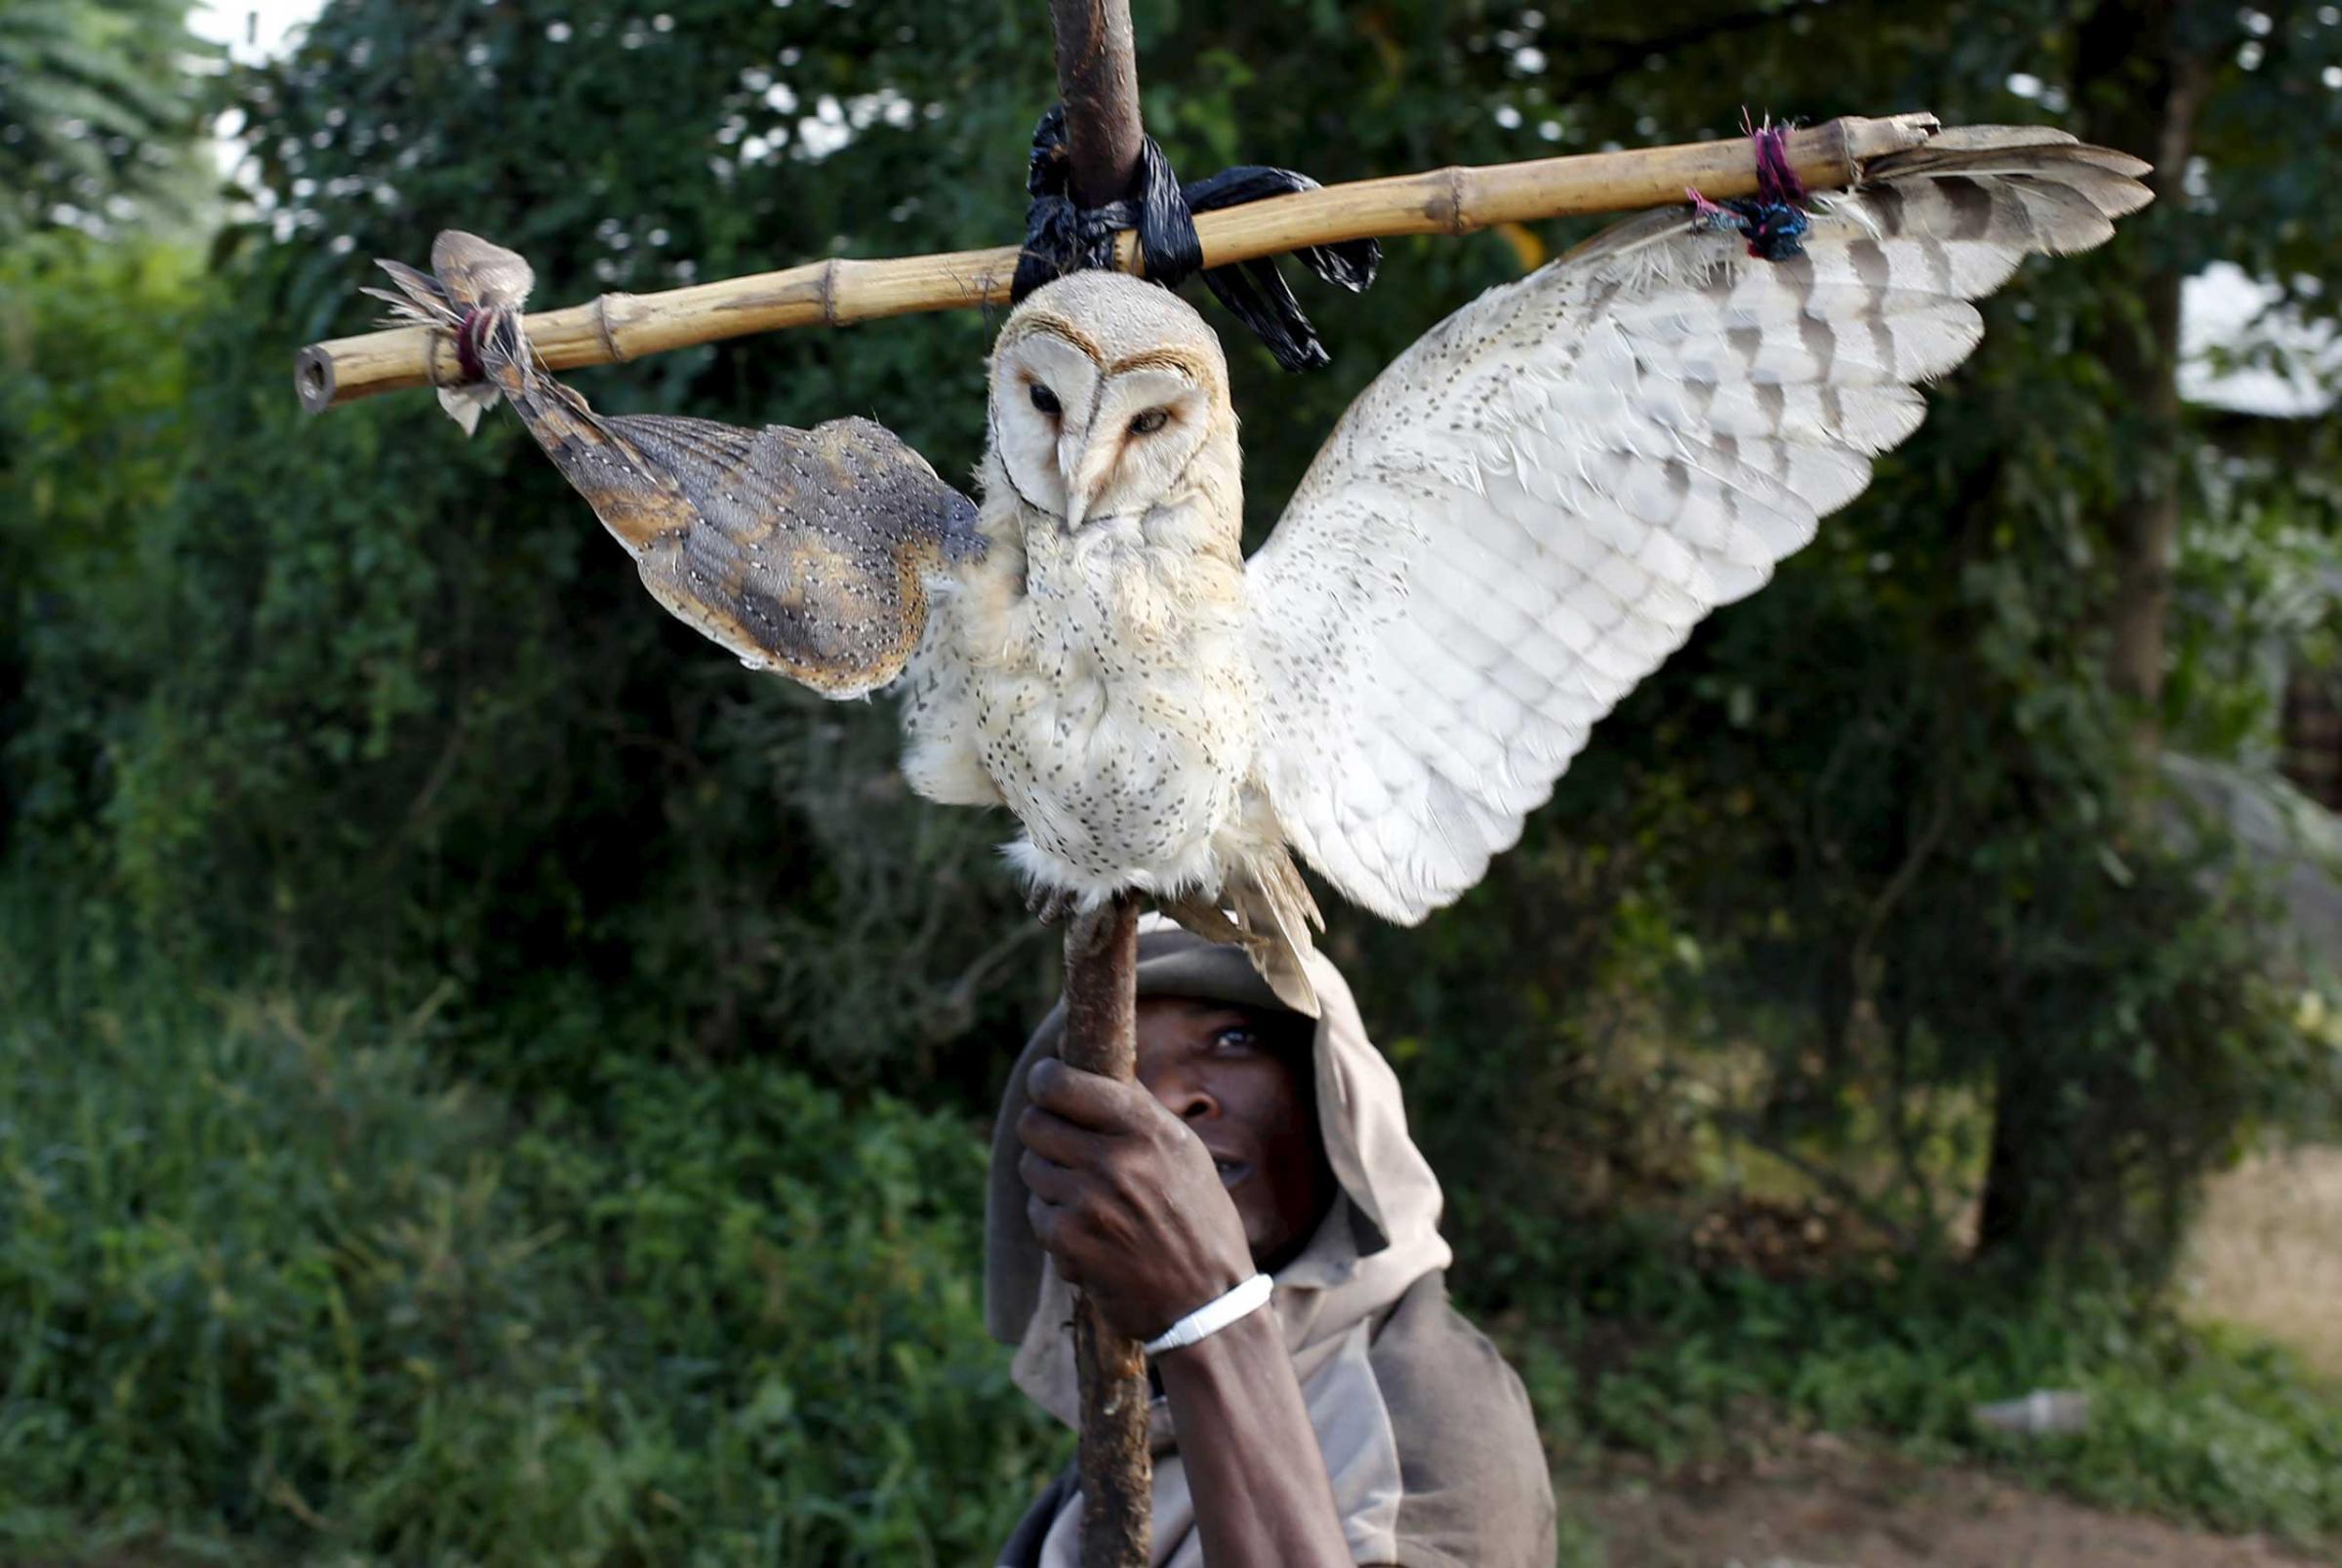 A protestor holds up a dead owl attached to a stick, intended to denigrate the ruling party whose emblem is an eagle, during a protest in Buterere neighbourhood of Bujumbura